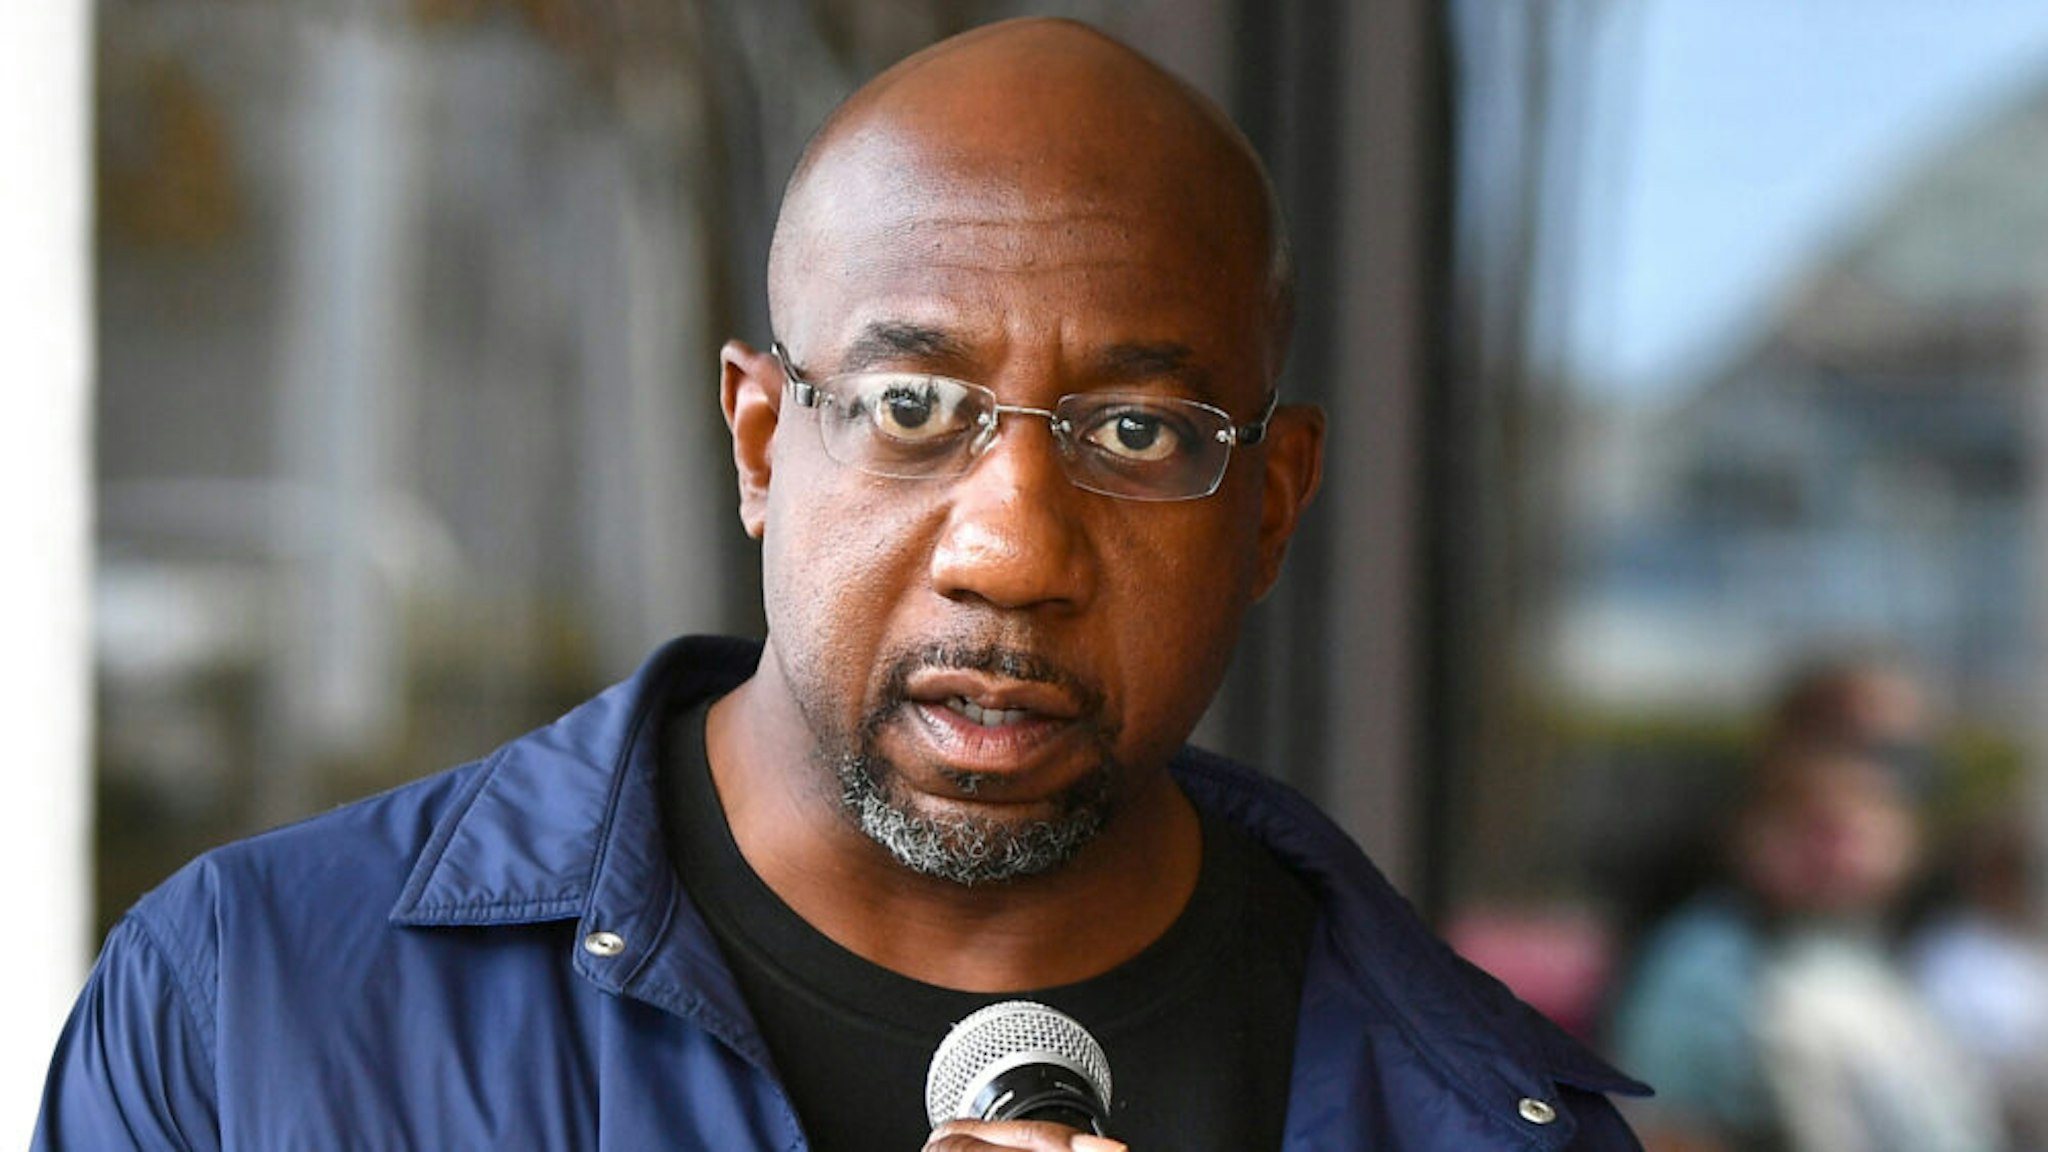 ATLANTA, GEORGIA - NOVEMBER 26: Raphael Warnock speaks onstage during Hosea Helps Thanksgiving Dinner Drive Thru at Georgia World Congress Center on November 26, 2020 in Atlanta, Georgia. The annual event was converted into an drive thru outdoor concept due to ongoing COVID-19 pandemic.